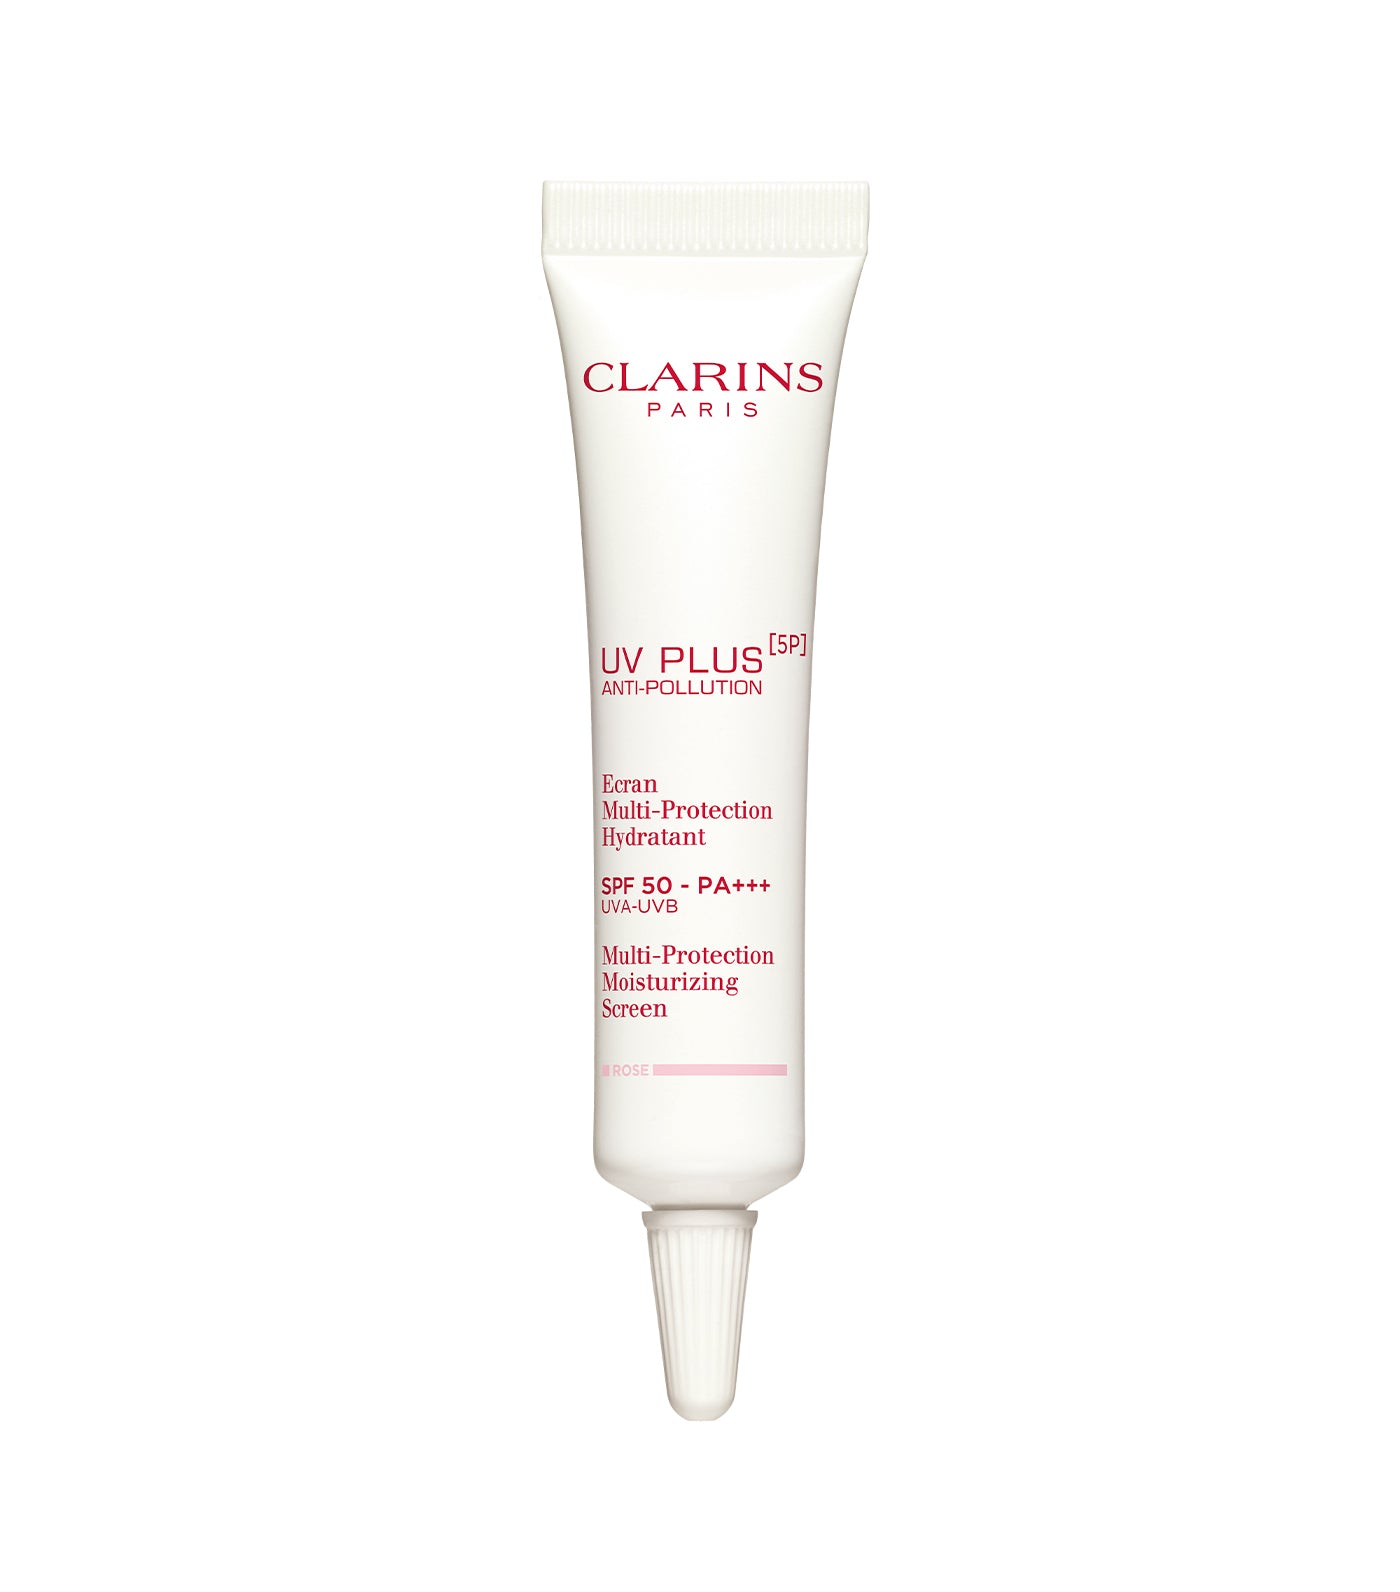 Free Trial Size UV Plus [5P] Anti-Pollution SPF50/PA+++ in Rose